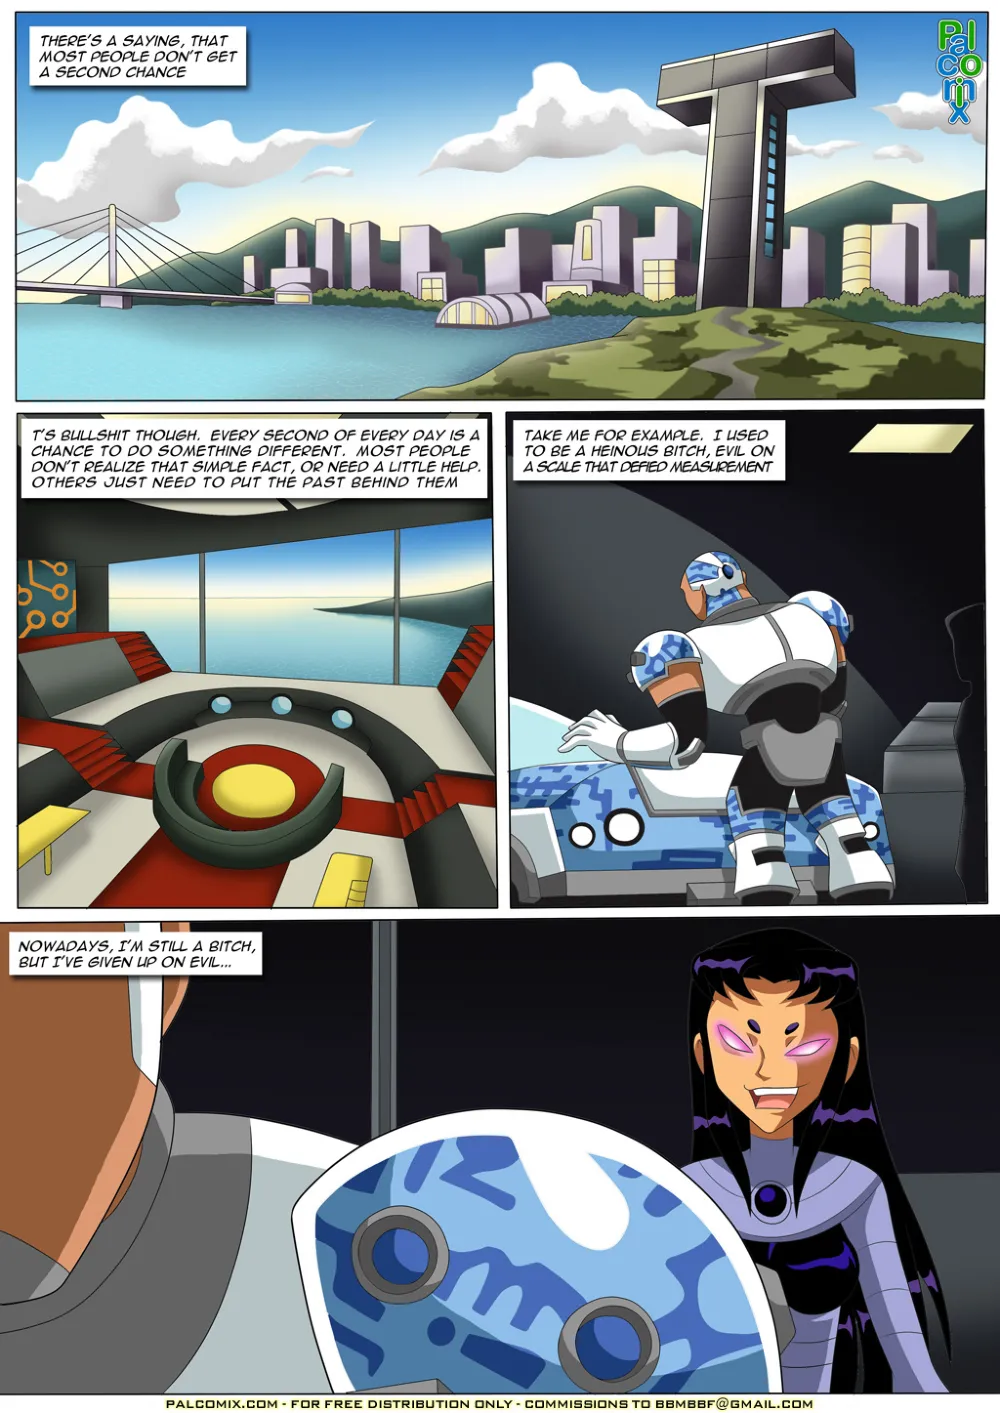 Second Chance - Page 2